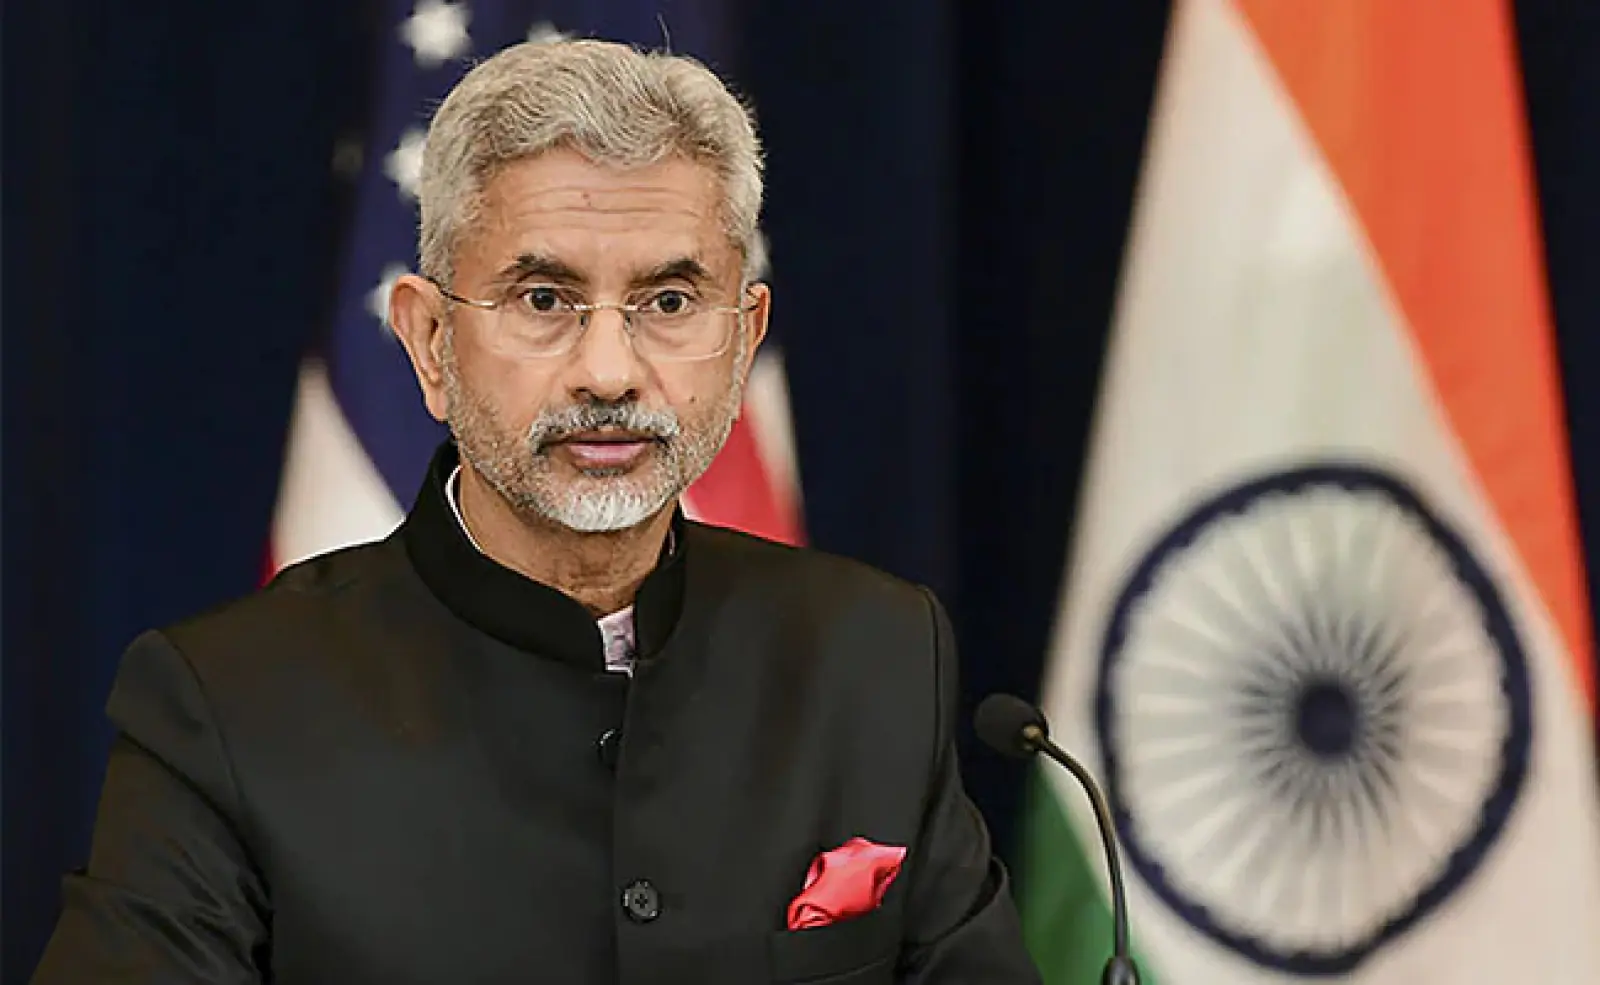 S Jaishankar: 'India's security interests are also linked to Pannun case', Foreign Minister said - 'Nothing to say right now'